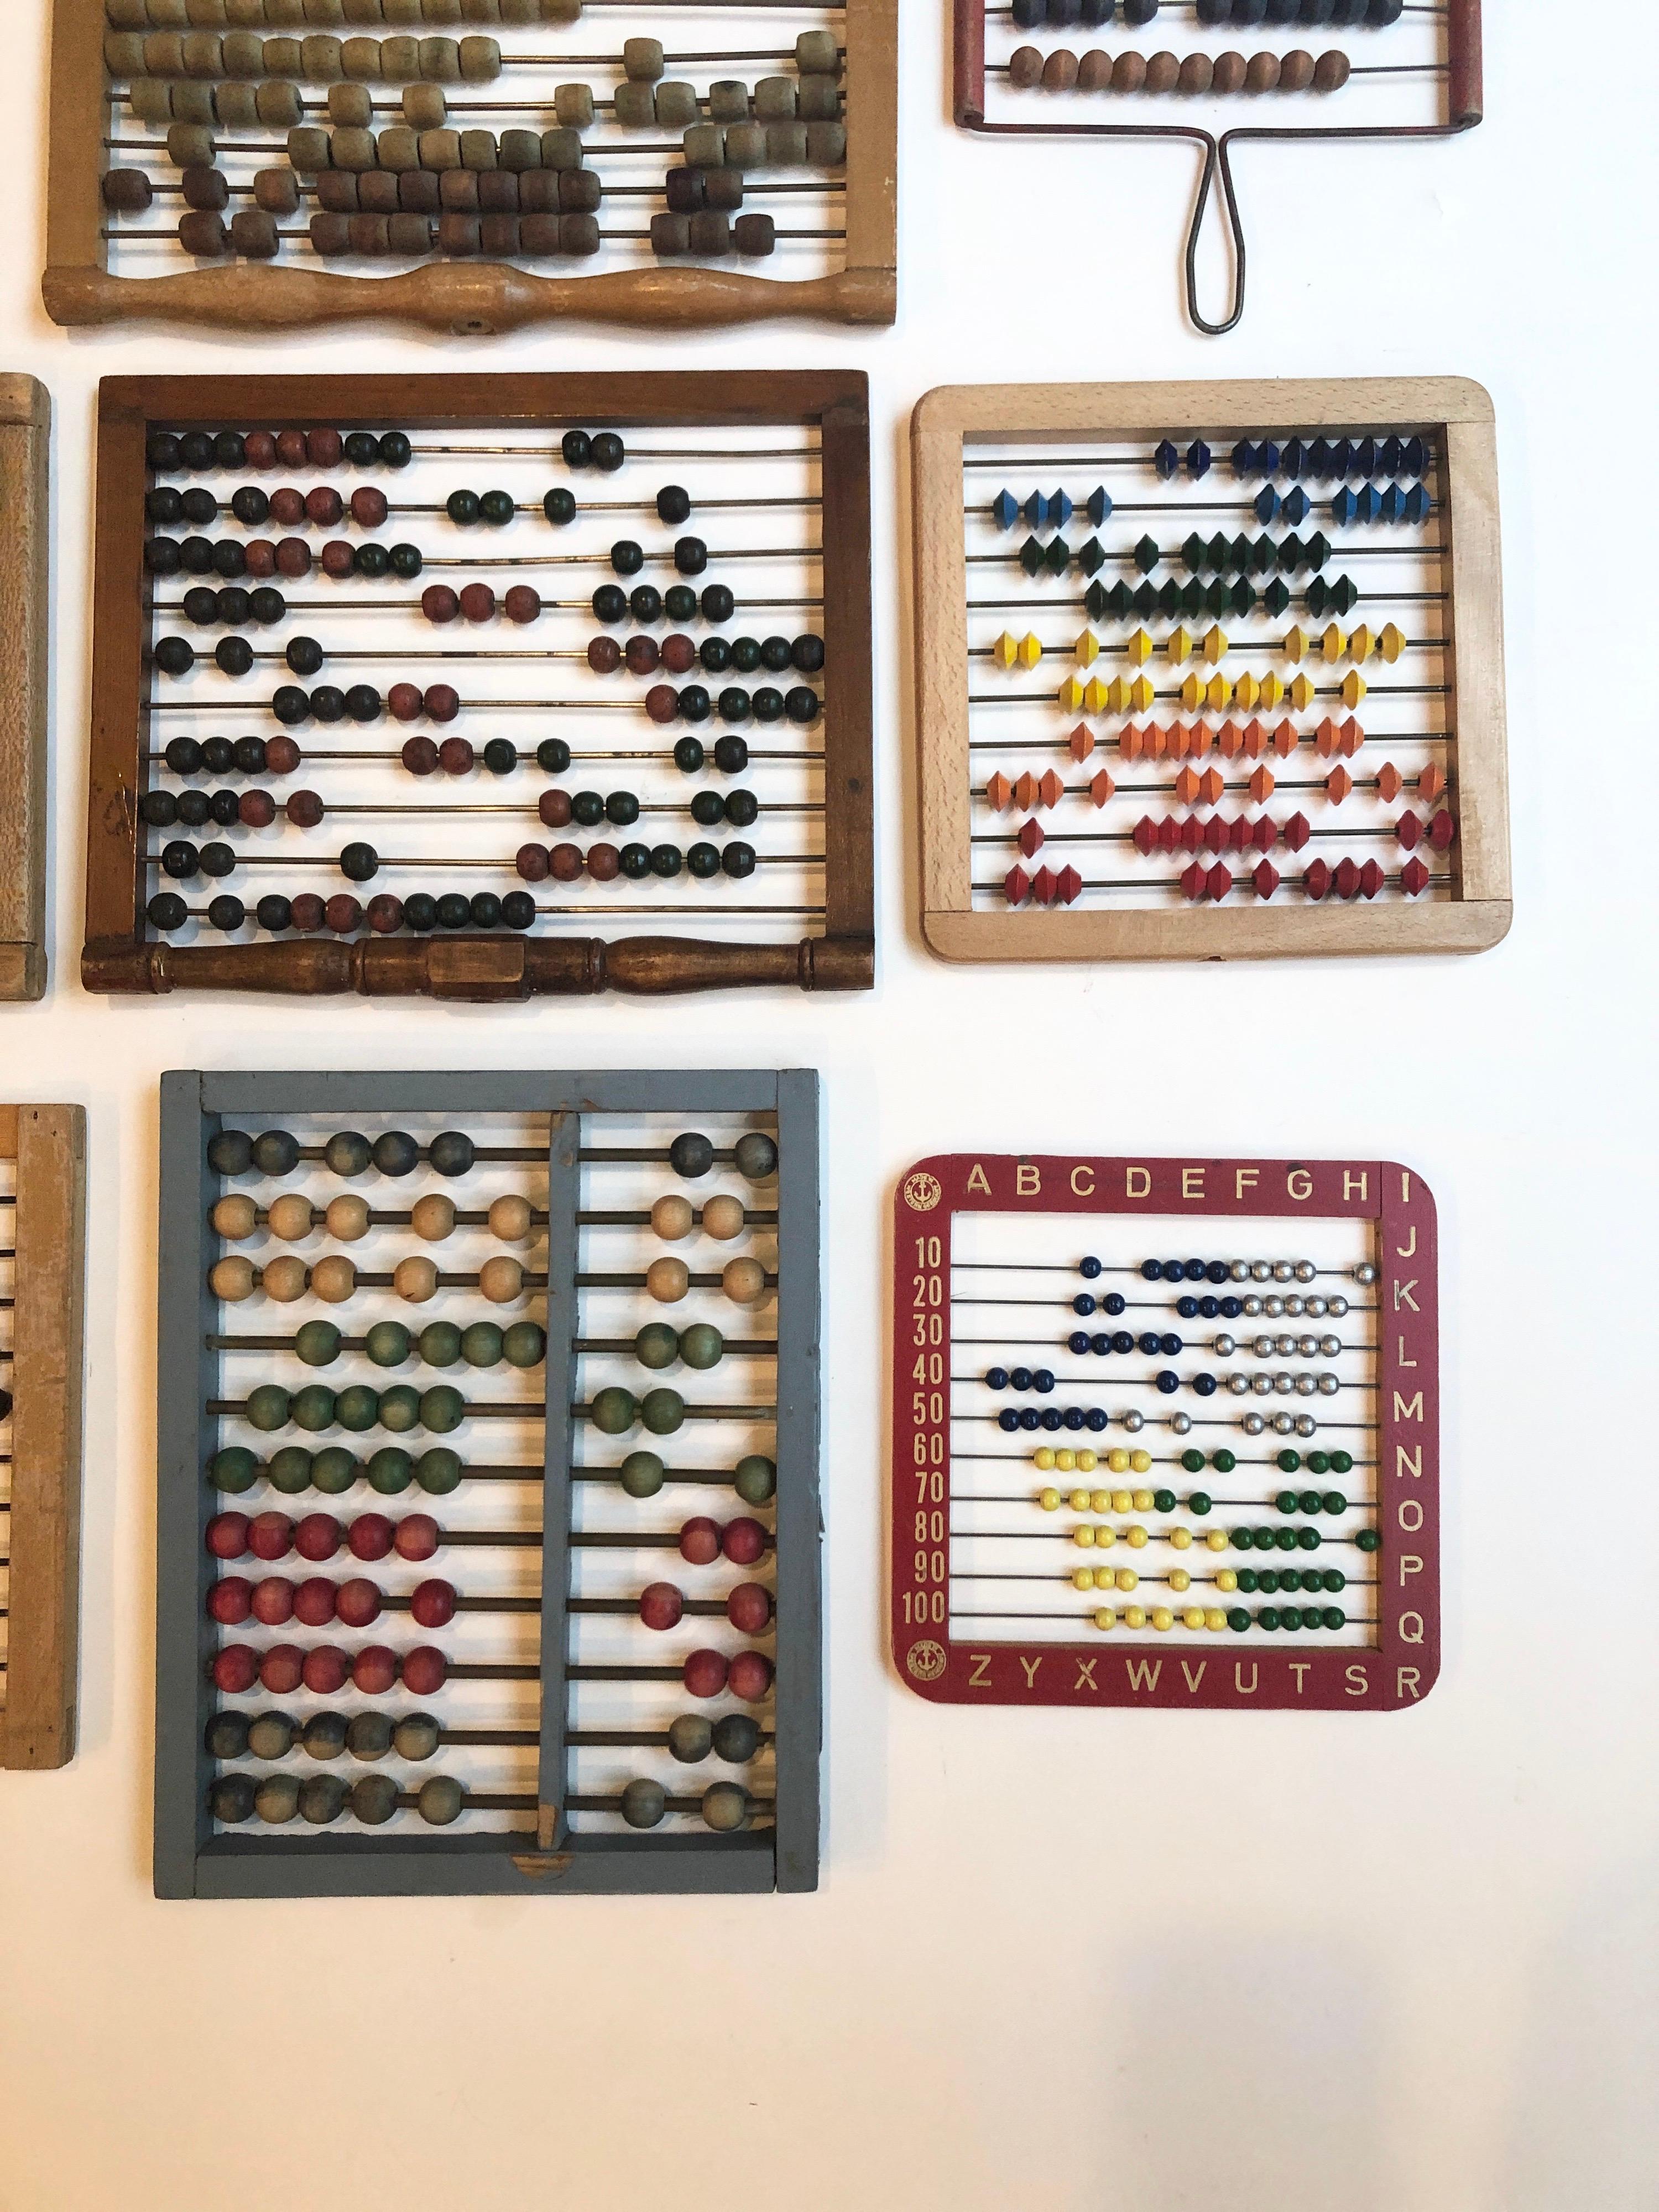 Wood Vintage and Antique Colorful Child’s Abacus Collection